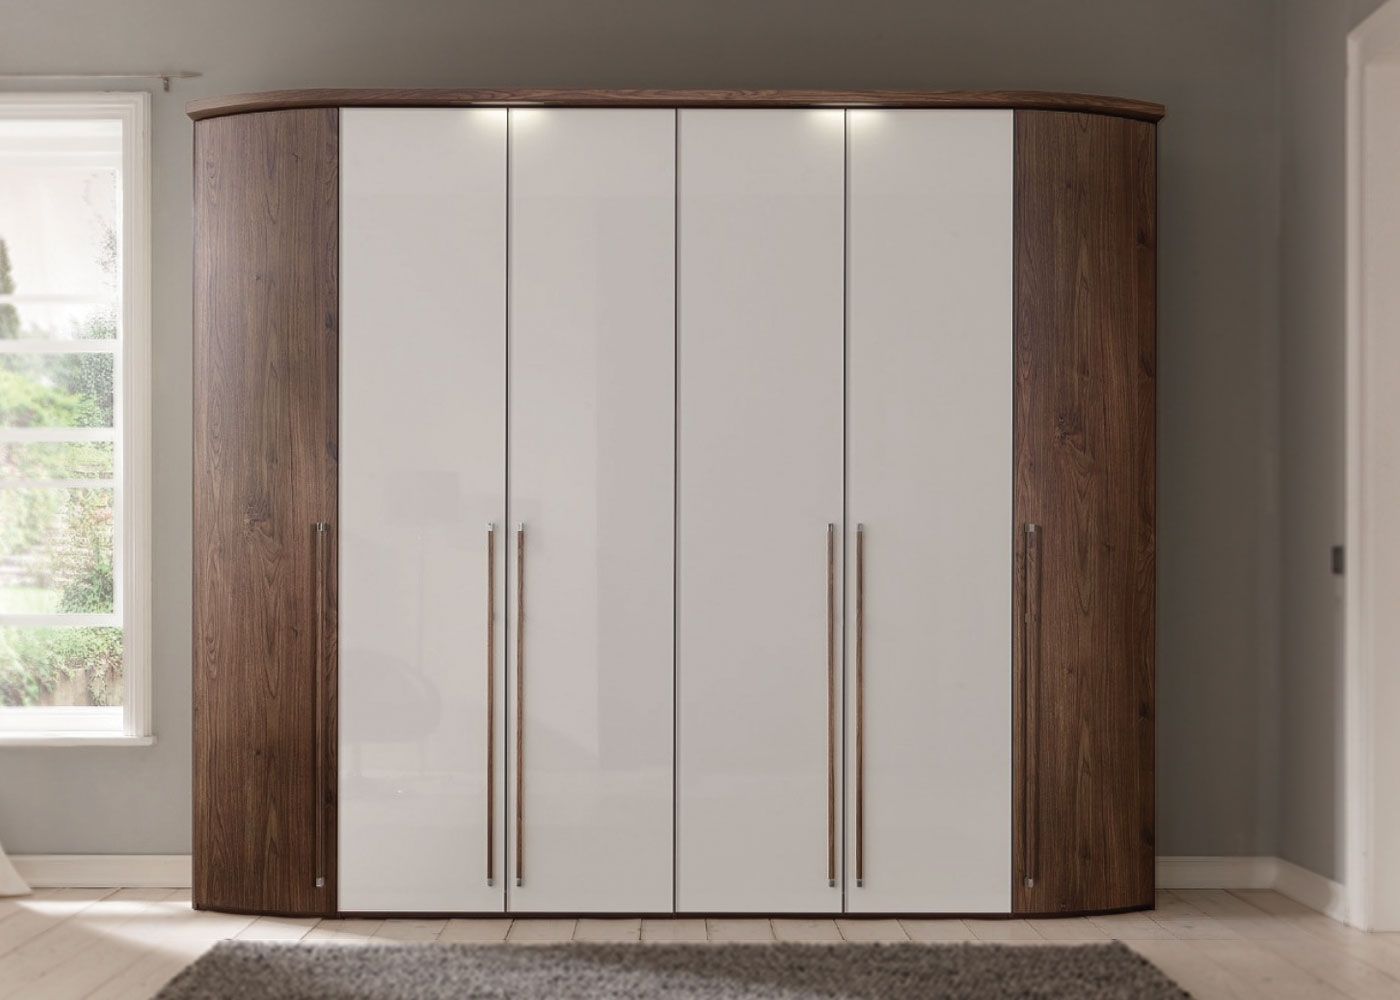 Nolte Möbel Horizon T100 Wardrobe With Curved Sides – Midfurn Furniture  Superstore Throughout Curved Wardrobes Doors (View 9 of 15)